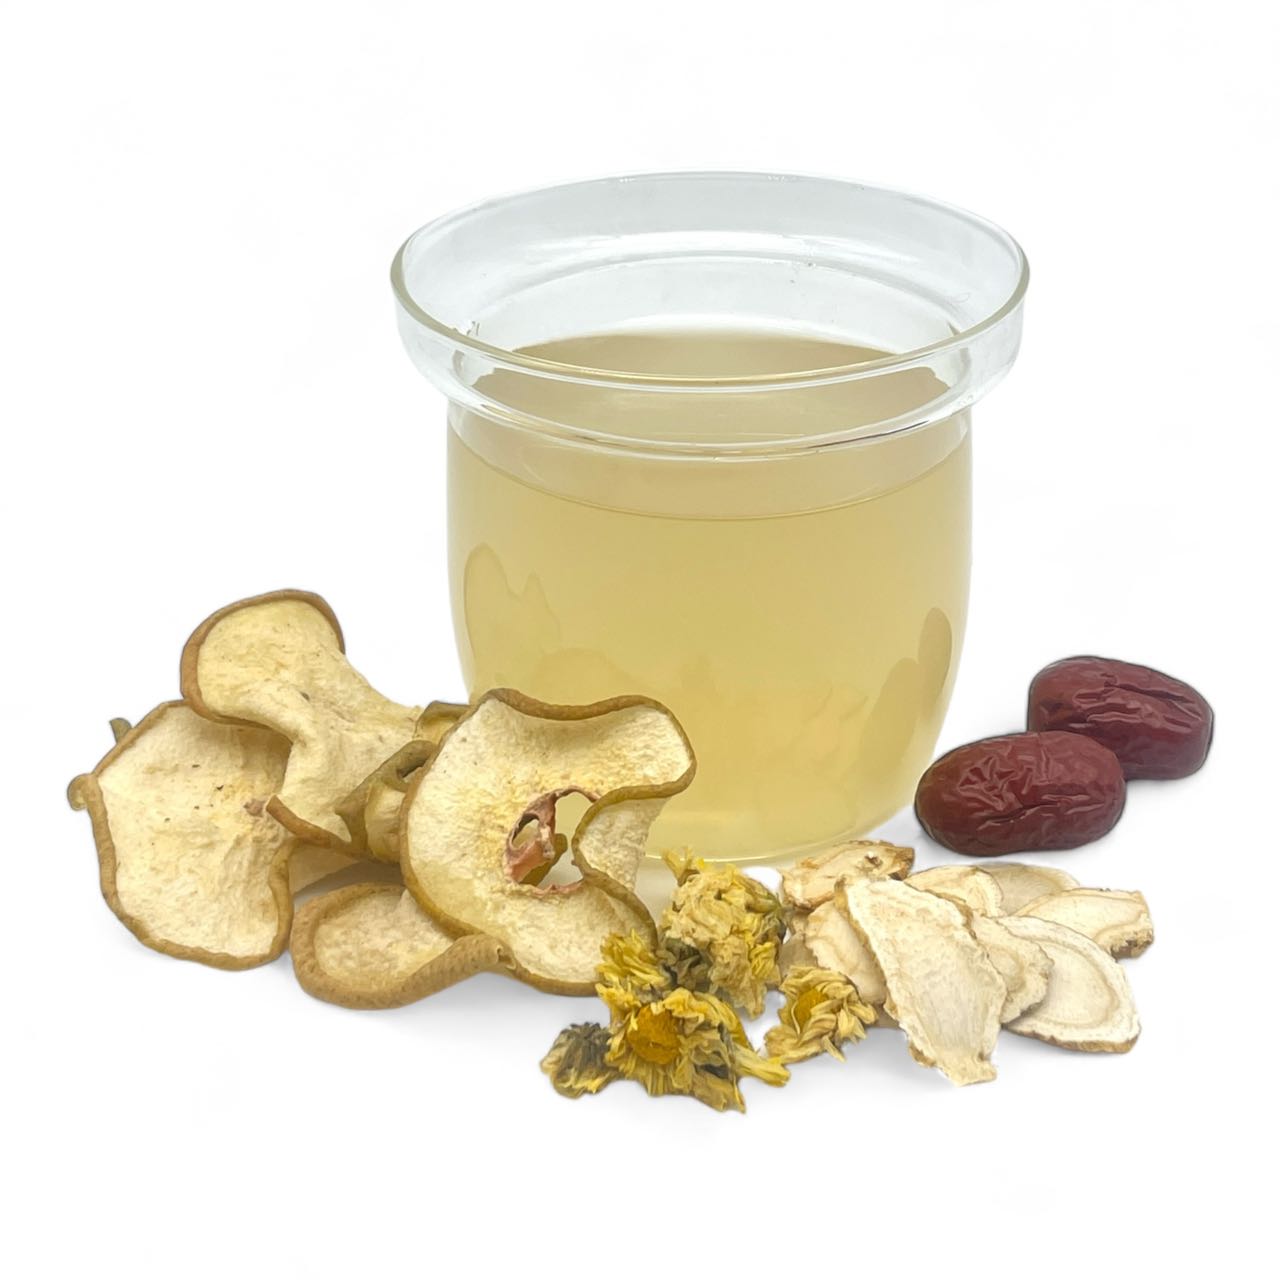 Autumn Pear, Red Date, and American Ginseng Tea